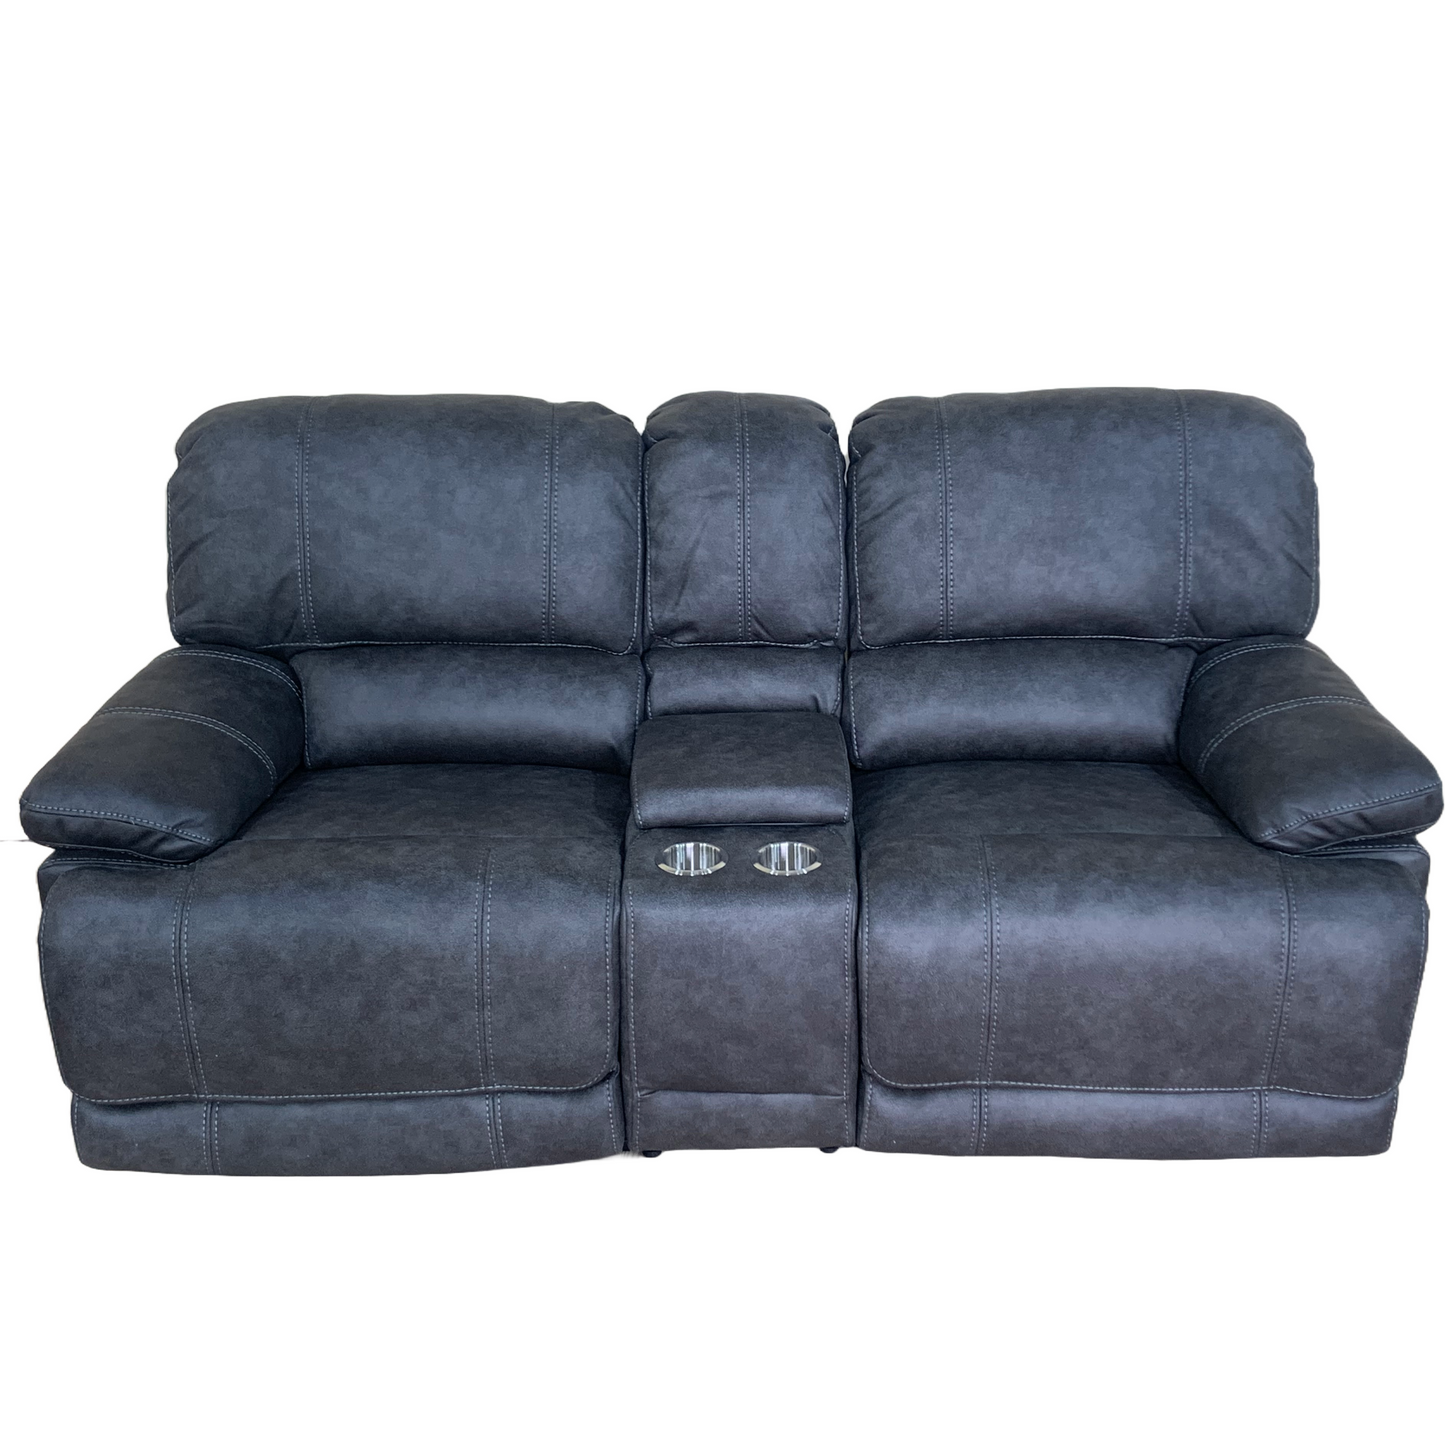 Manchester Lounge Suite - Grey